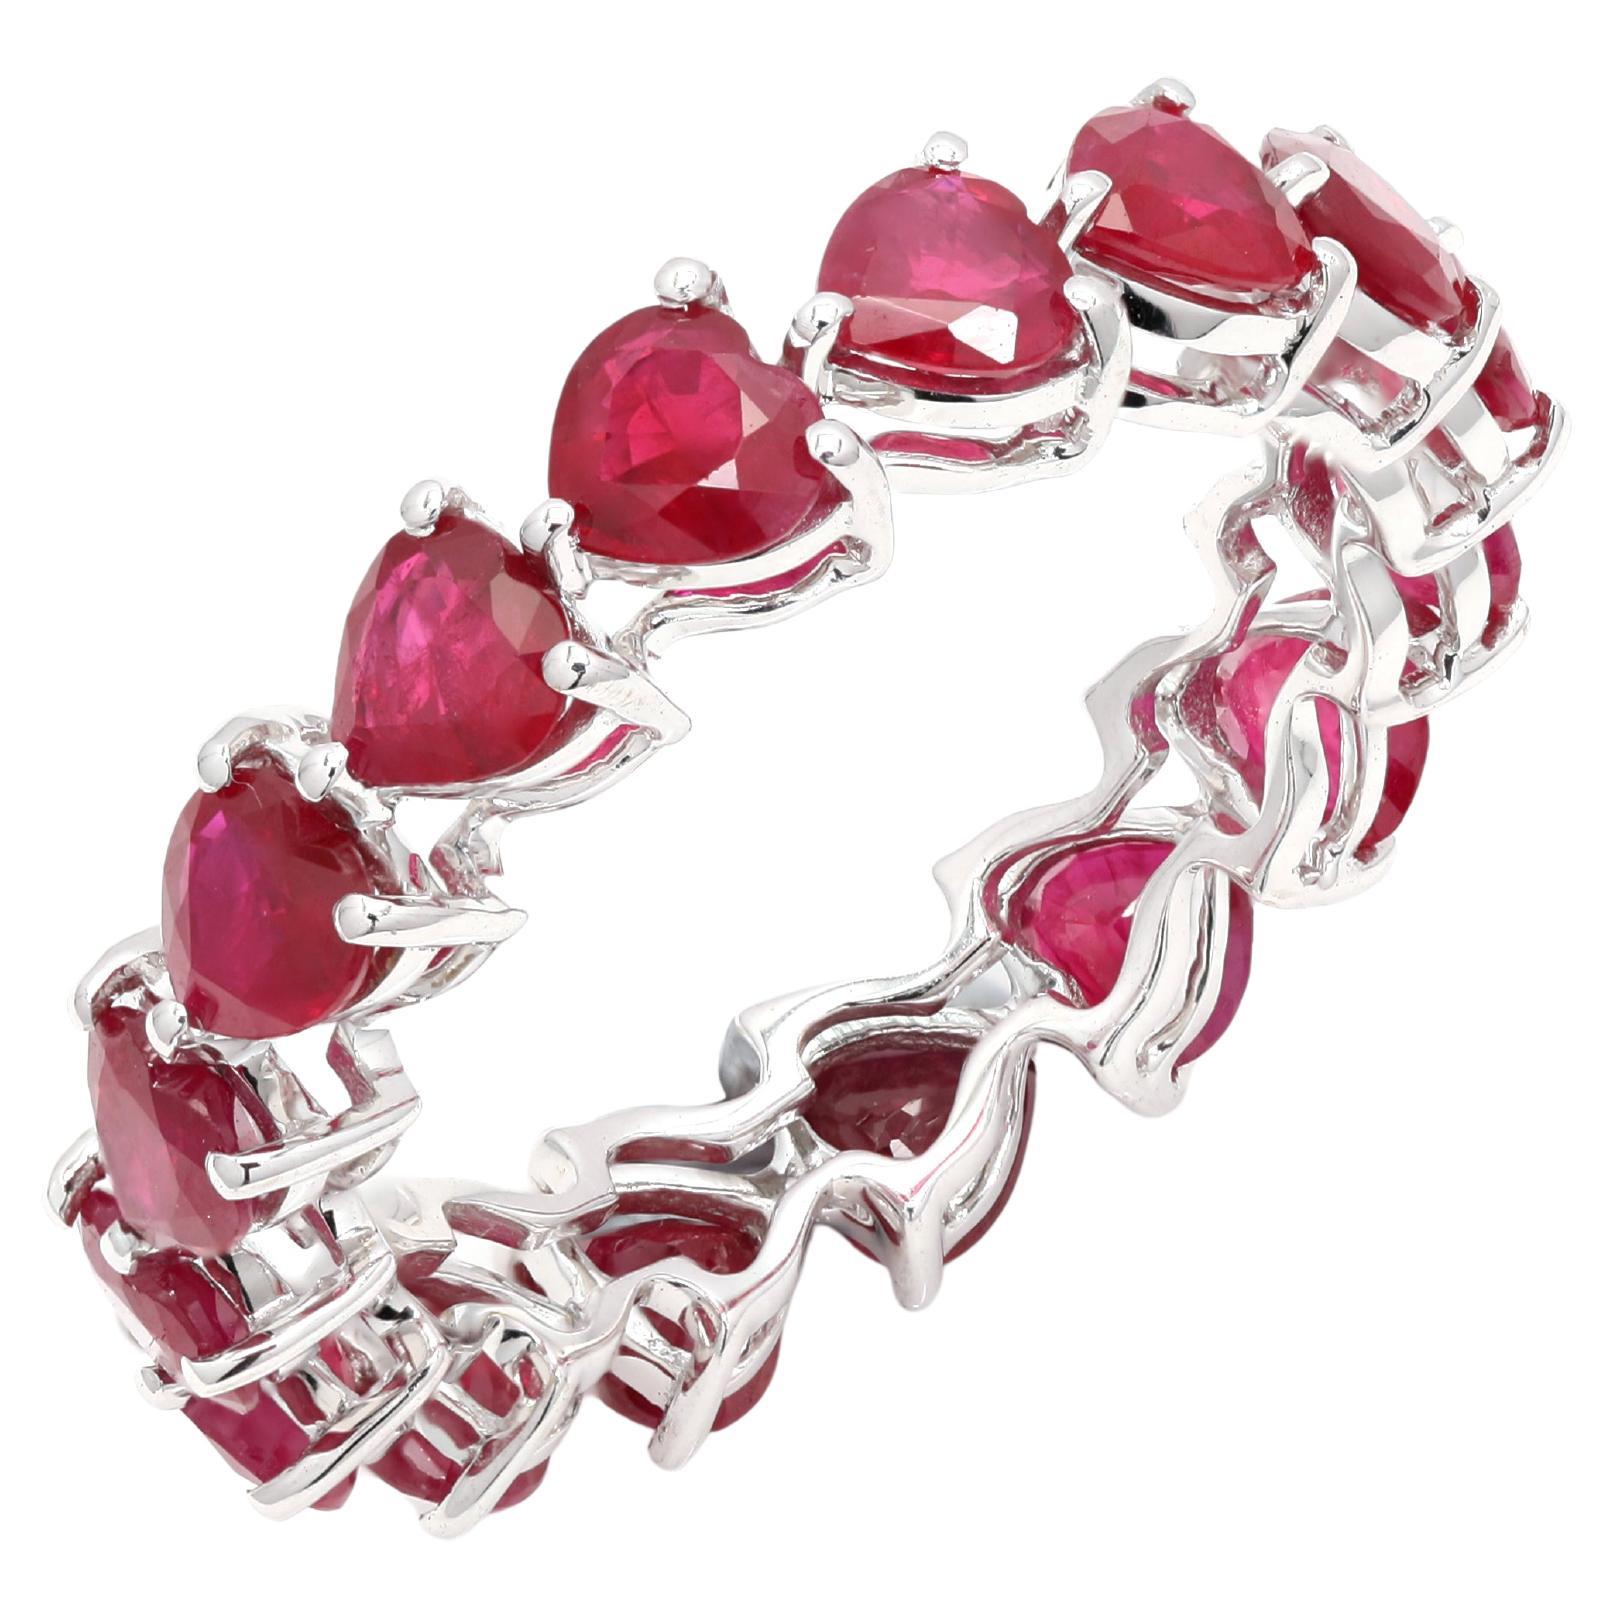 For Sale:  4.41 Carat Ruby Eternity Band, 18K White Gold Ruby Band Ring